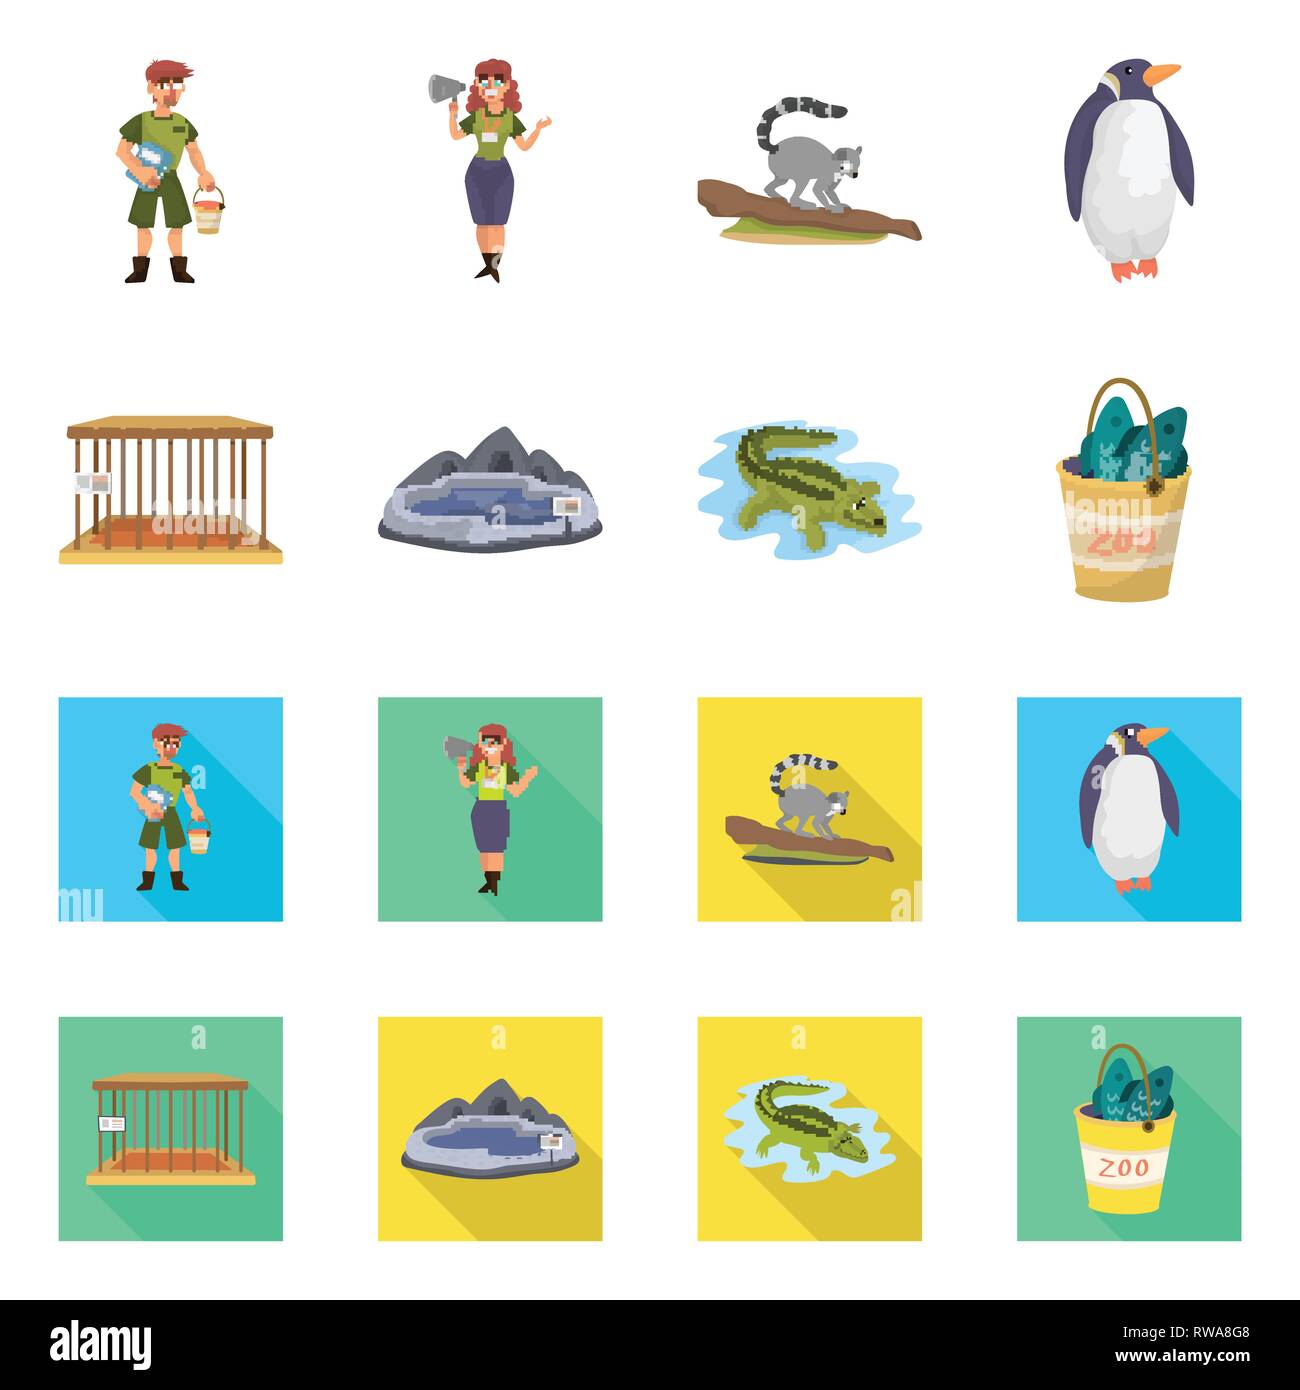 zookeeper,lemur,penguin,cell,lake,crocodile,bucket,man,woman,monkey,white,empty,pool,alligator,fish,worker,megaphone,Africa,cute,jail,water,full,keeper,tree,wild,metal,stone,fishing,tropical,north,nature,fun,fauna,entertainment,zoo,park,safari,animal,forest,flora,set,vector,icon,illustration,isolated,collection,design,element,graphic,sign Vector Vectors , Stock Vector